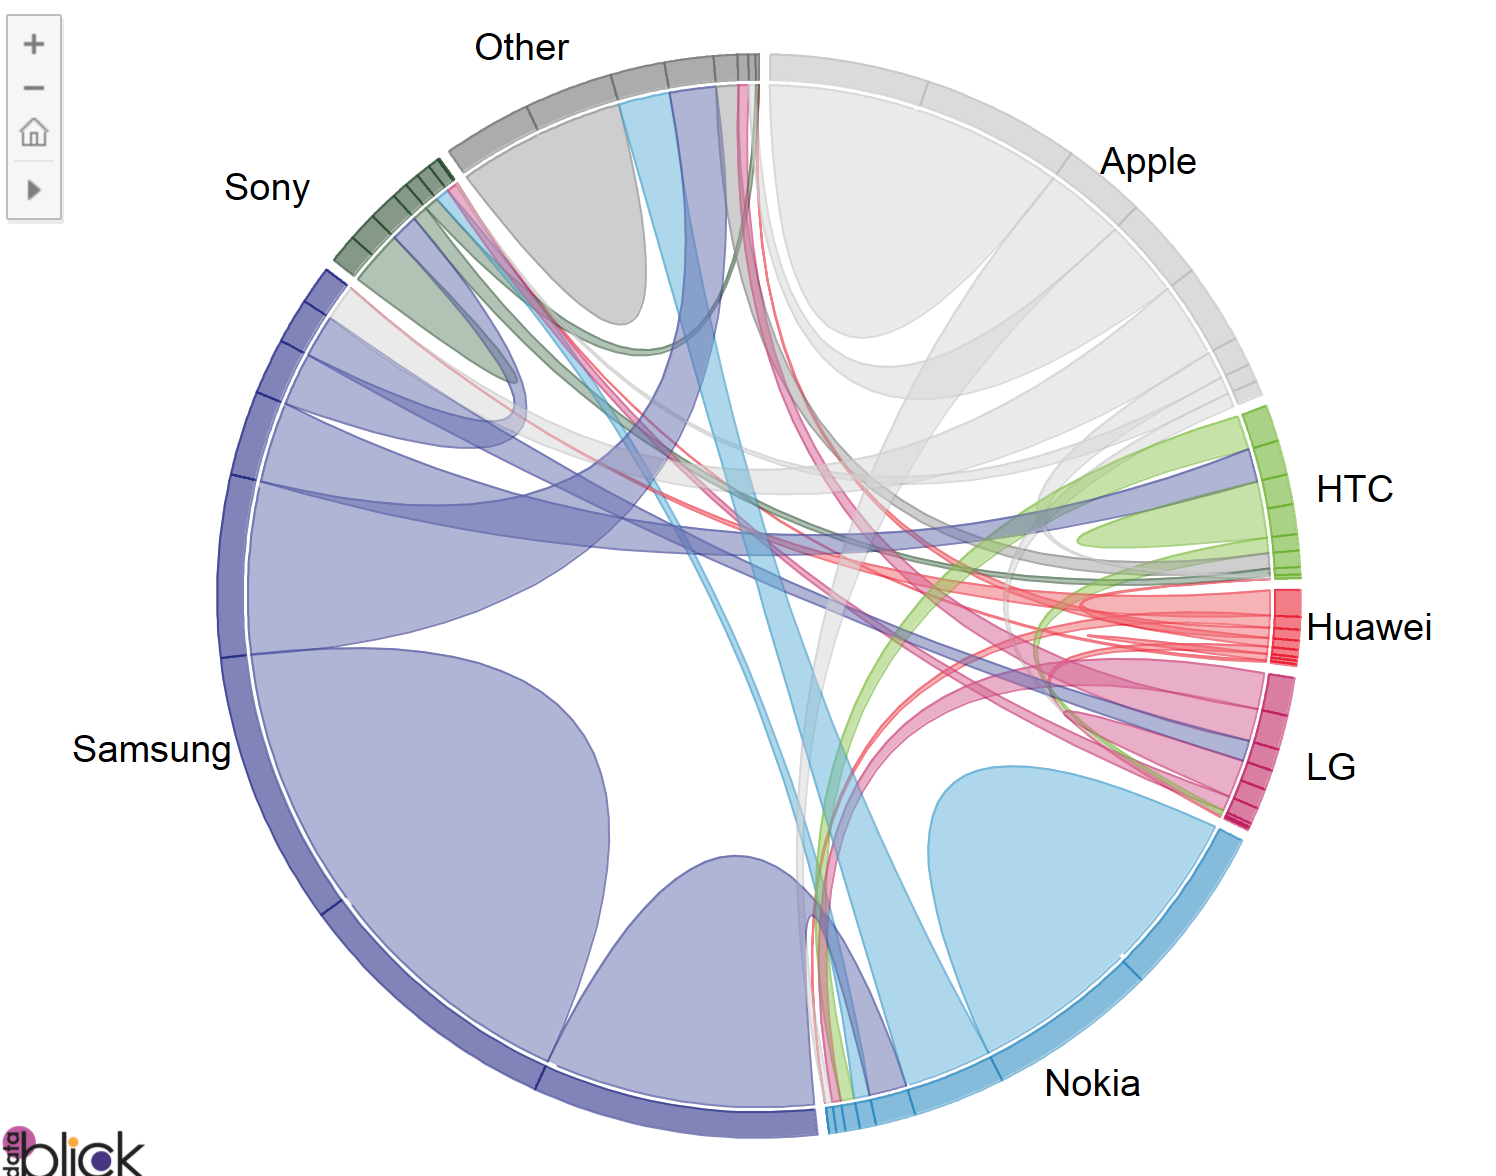 Cool Charts In Tableau